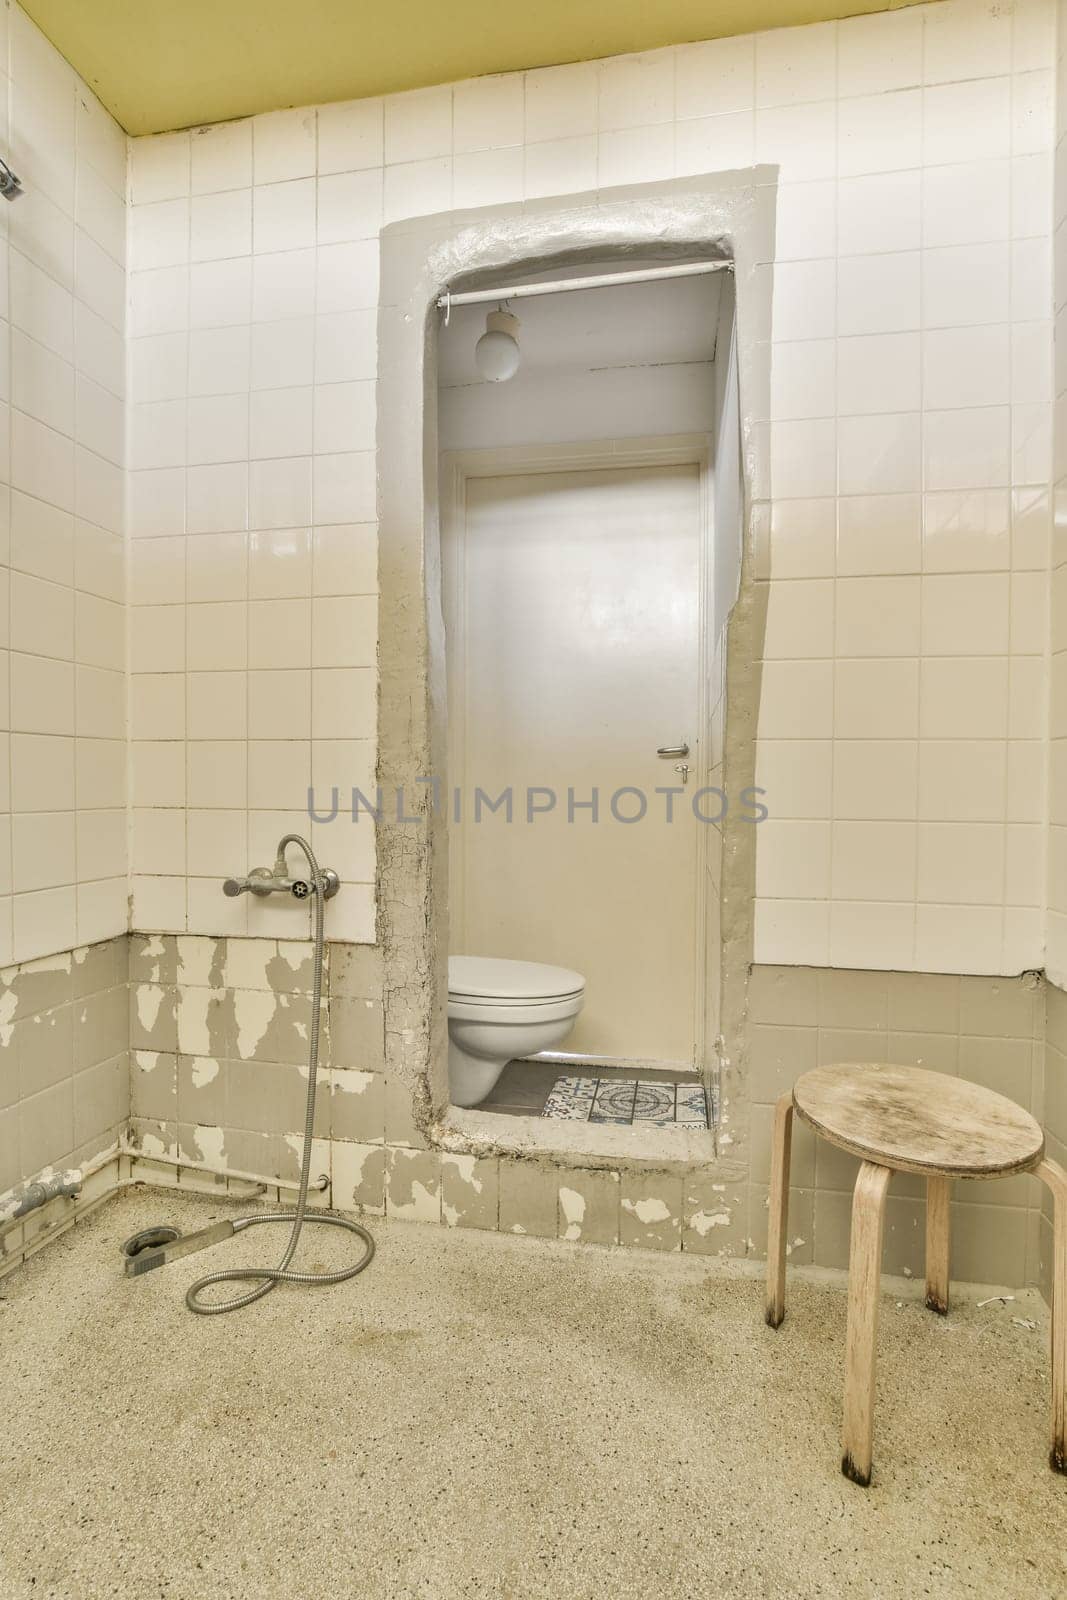 a bathroom that has been torn off and is in need of reurcement to make it look new